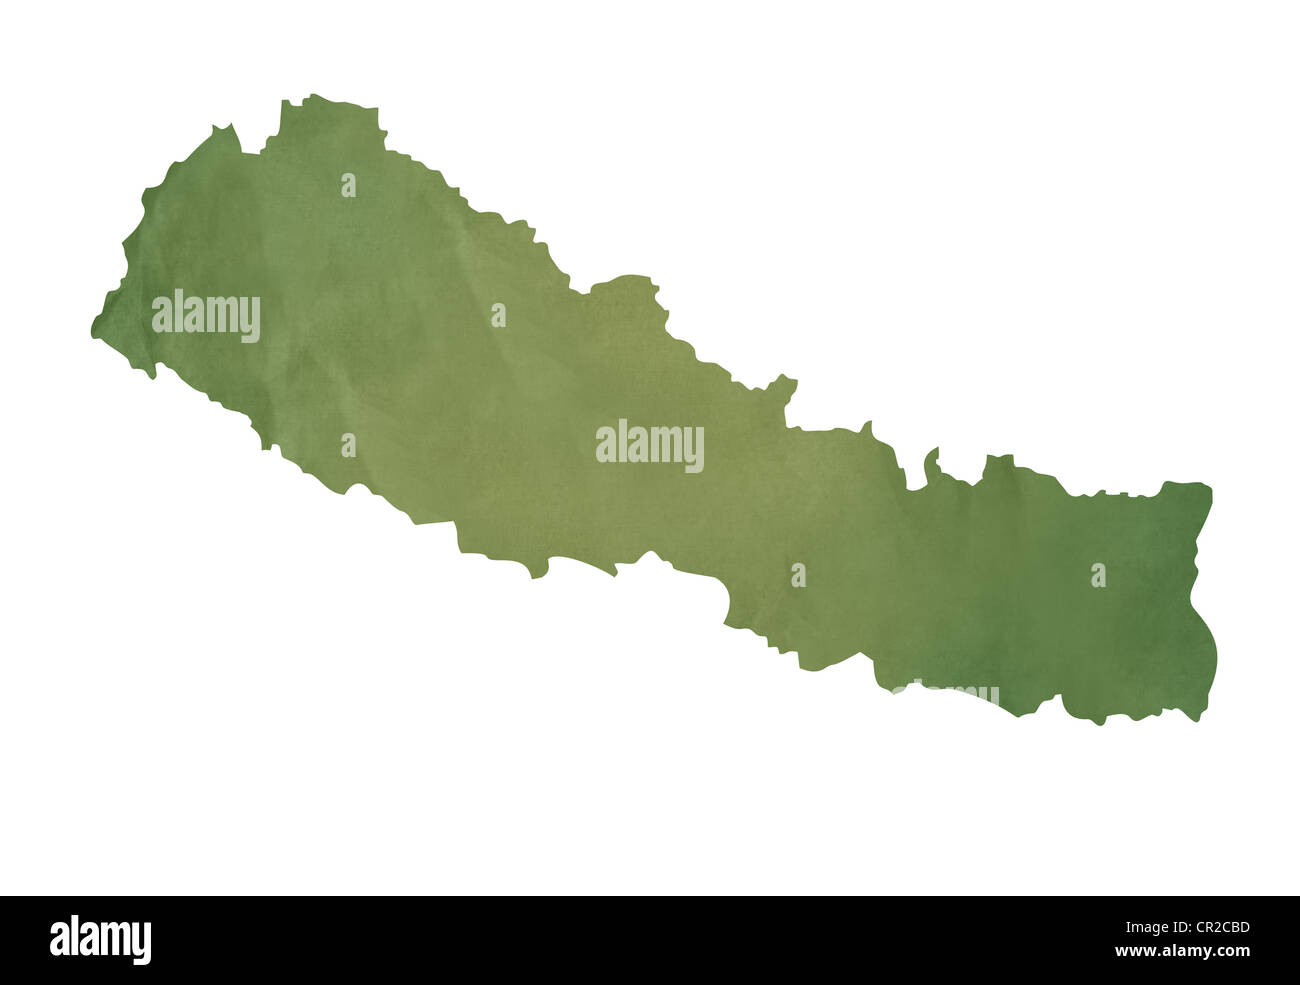 Old green map of Nepal in textured green paper, isolated on white background. Stock Photo